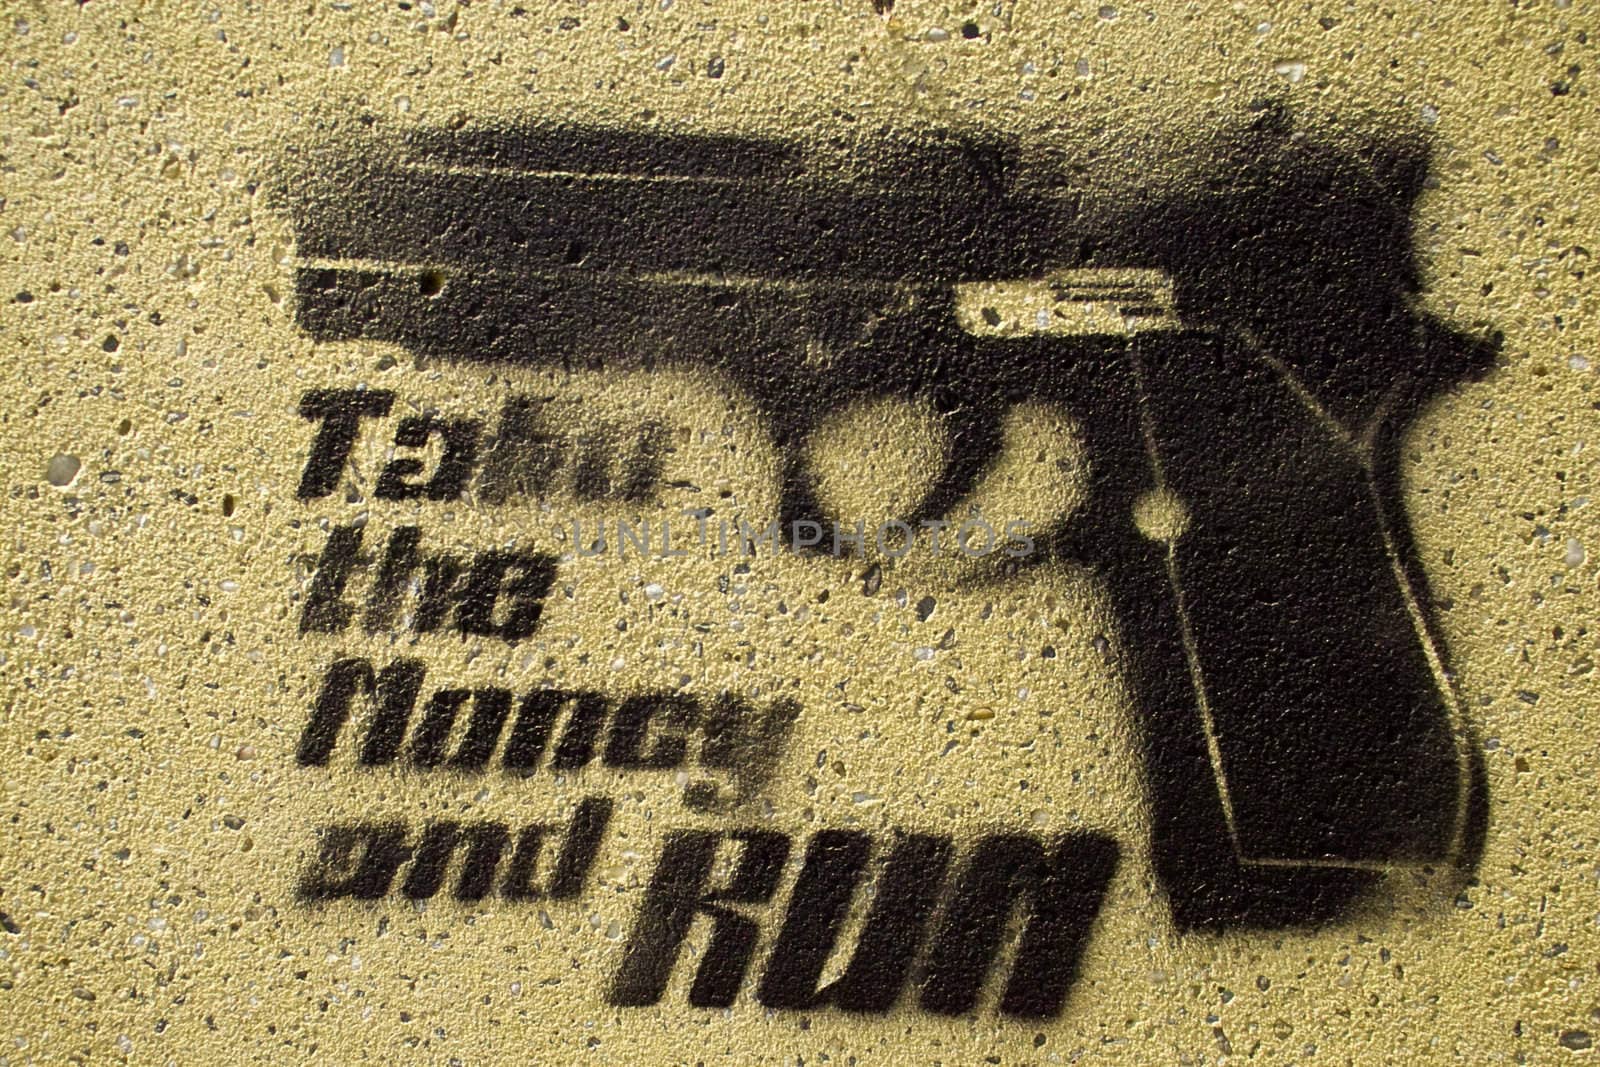 a black painting on a wall showing a pistol and the text take the money and run